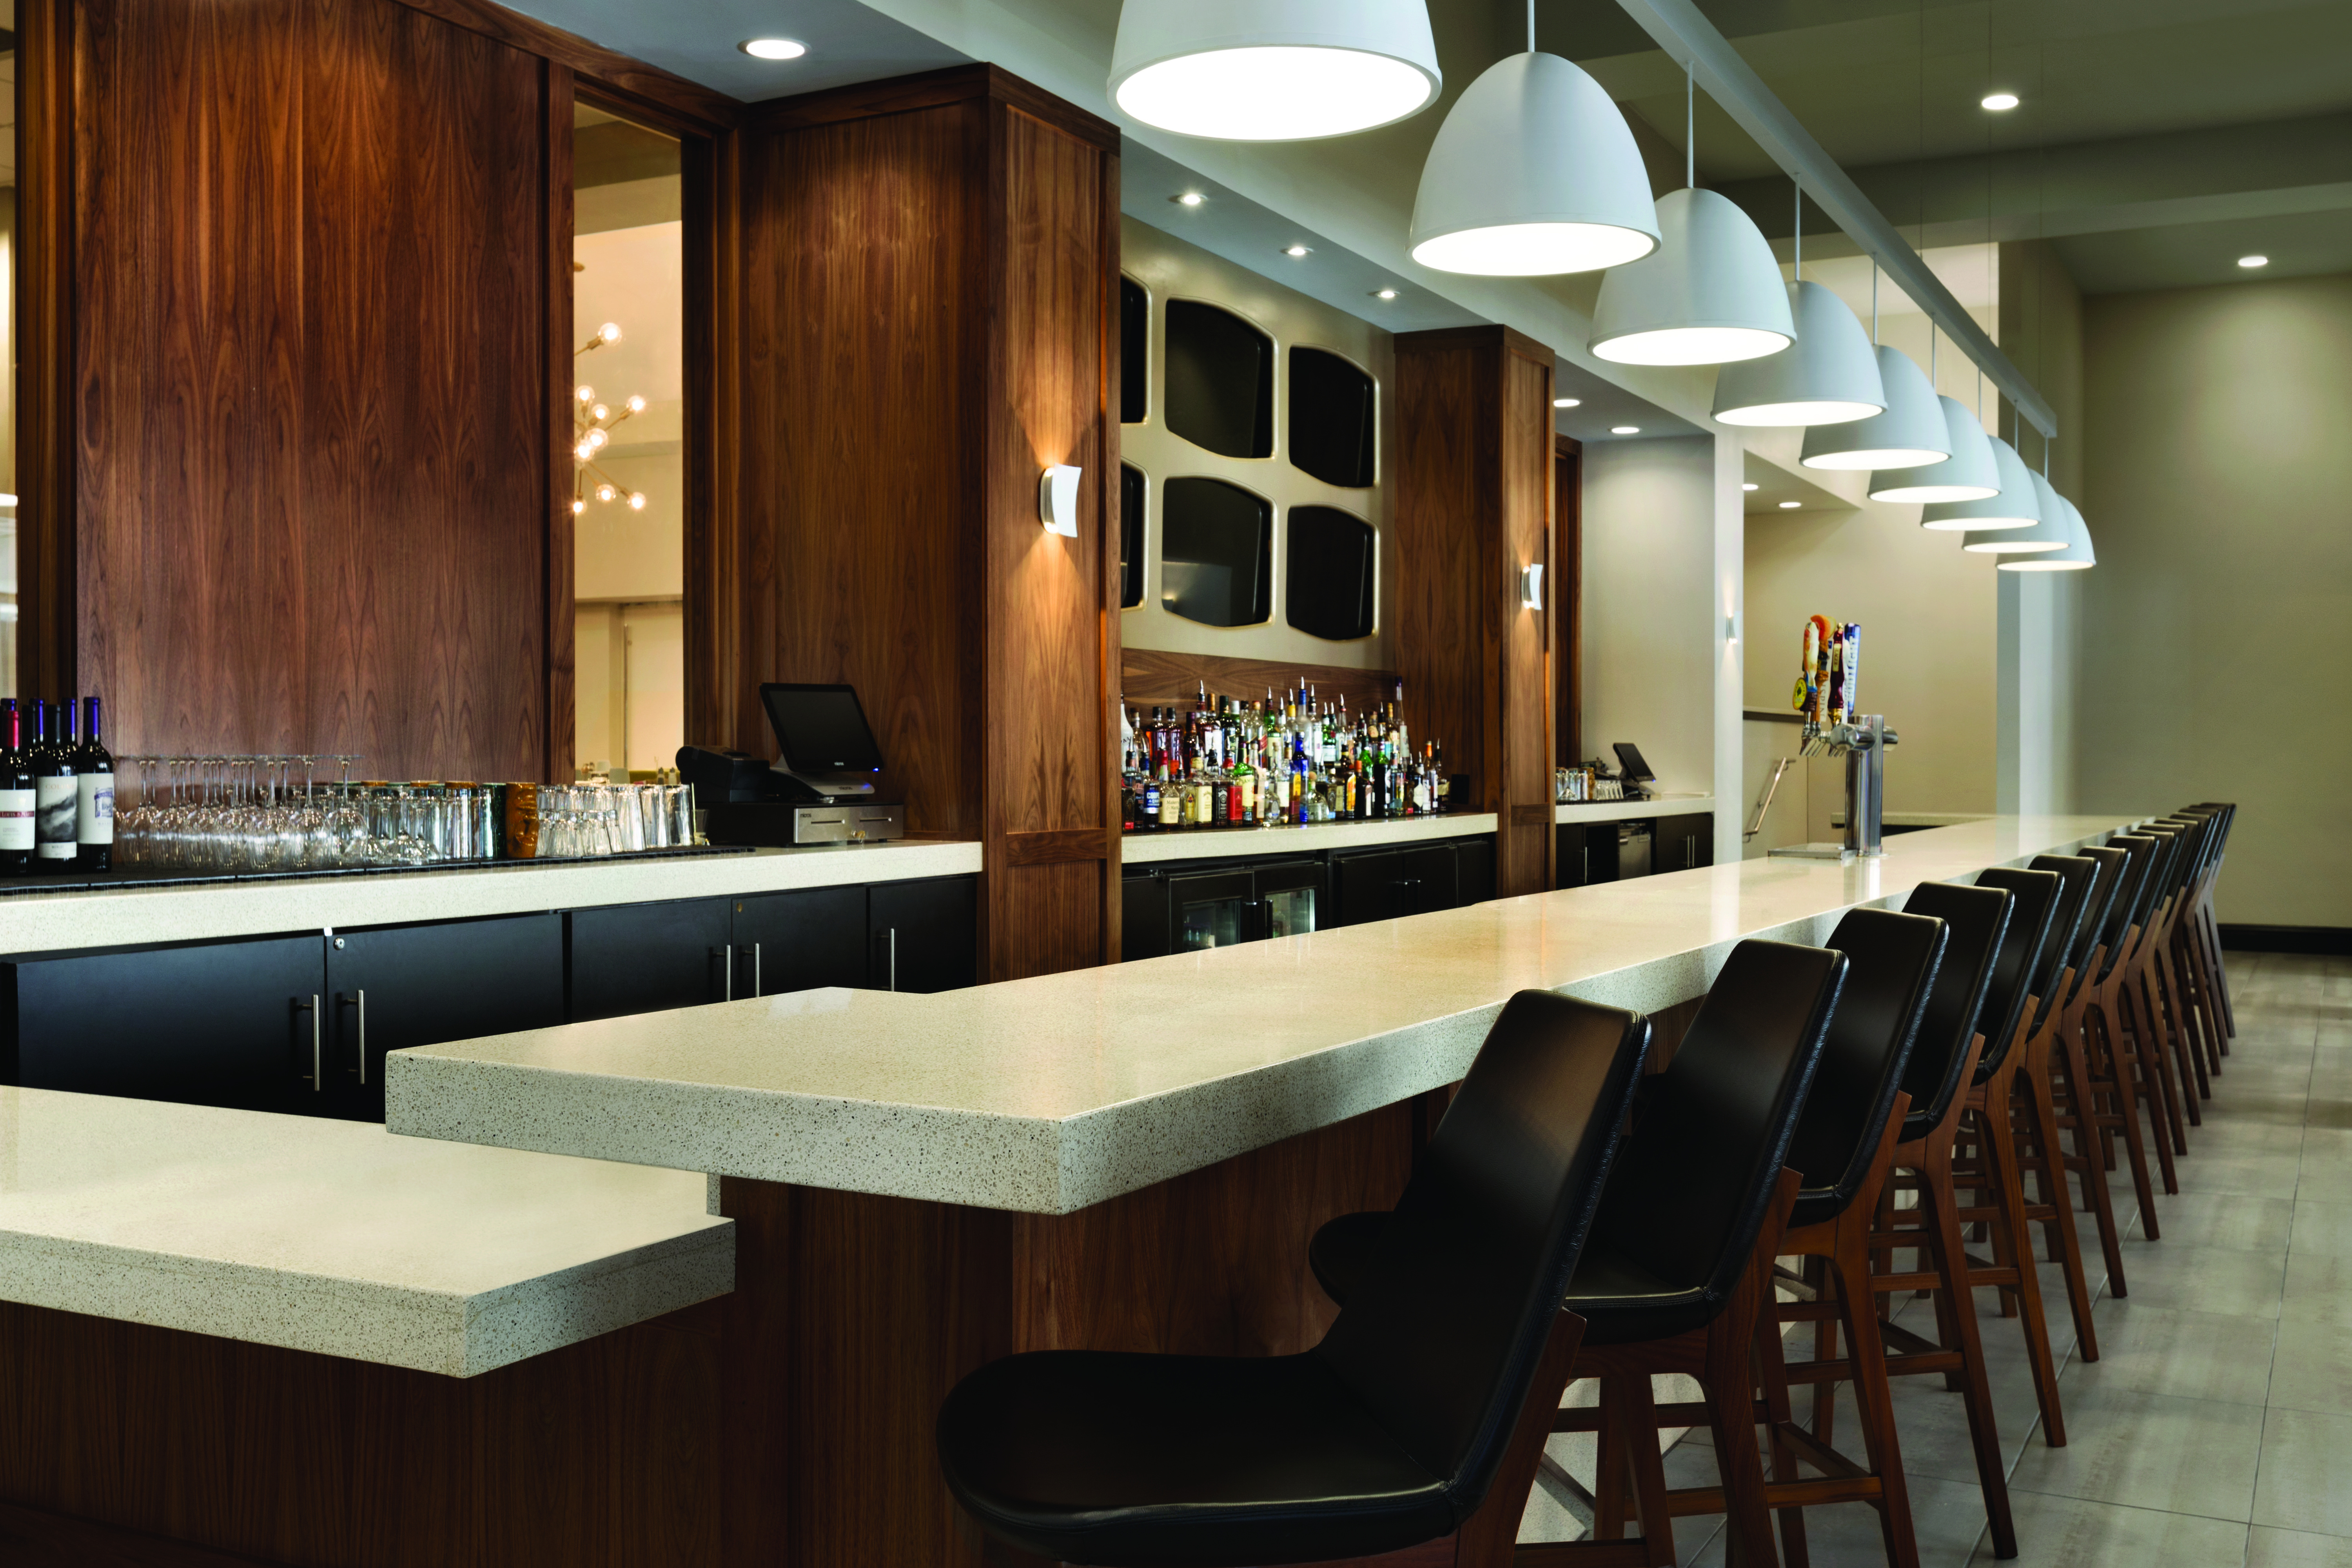 Angled View of the Bar, Chairs, and Service Area of The Cloakroom Bar